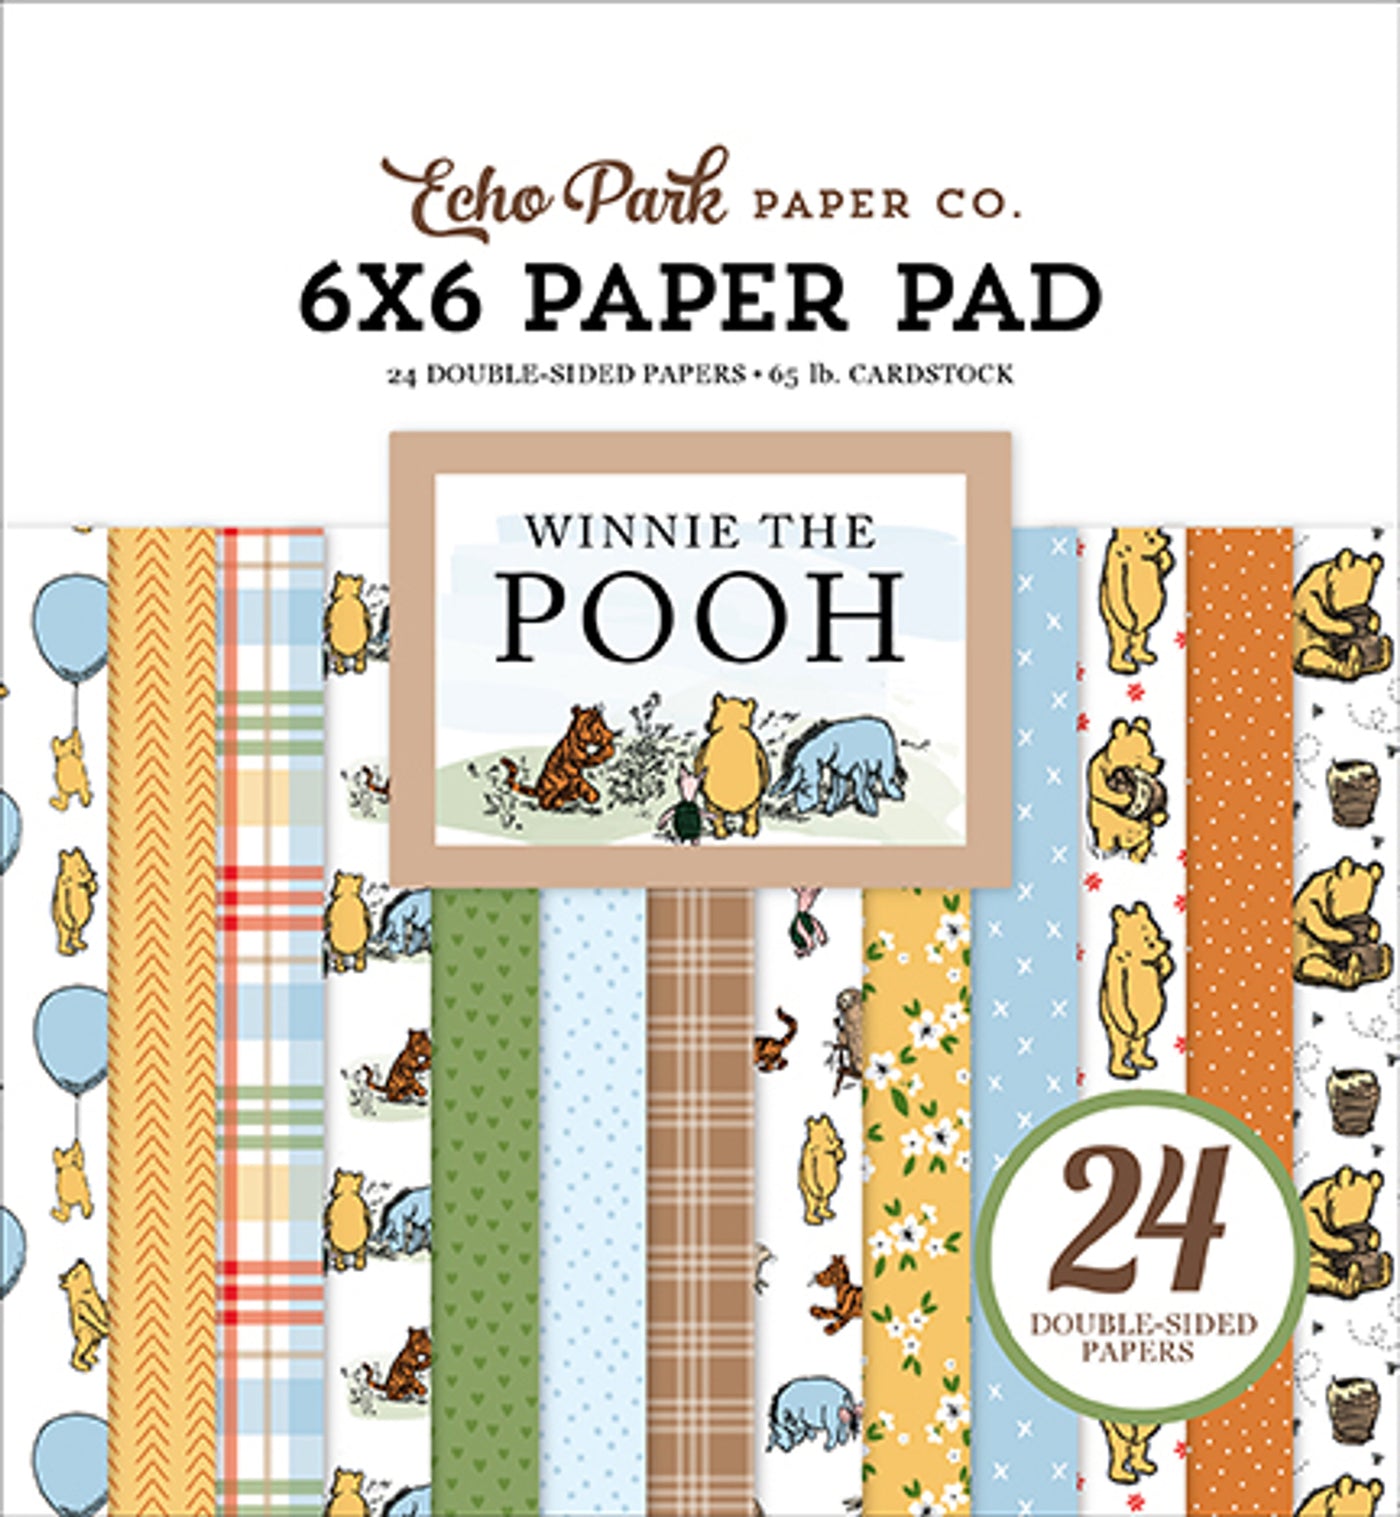 The 6x6 pad features cute designs and colors to celebrate the love for Winnie The Pooh! Fun for cards and papercrafts. Includes 24 double-sided pages.